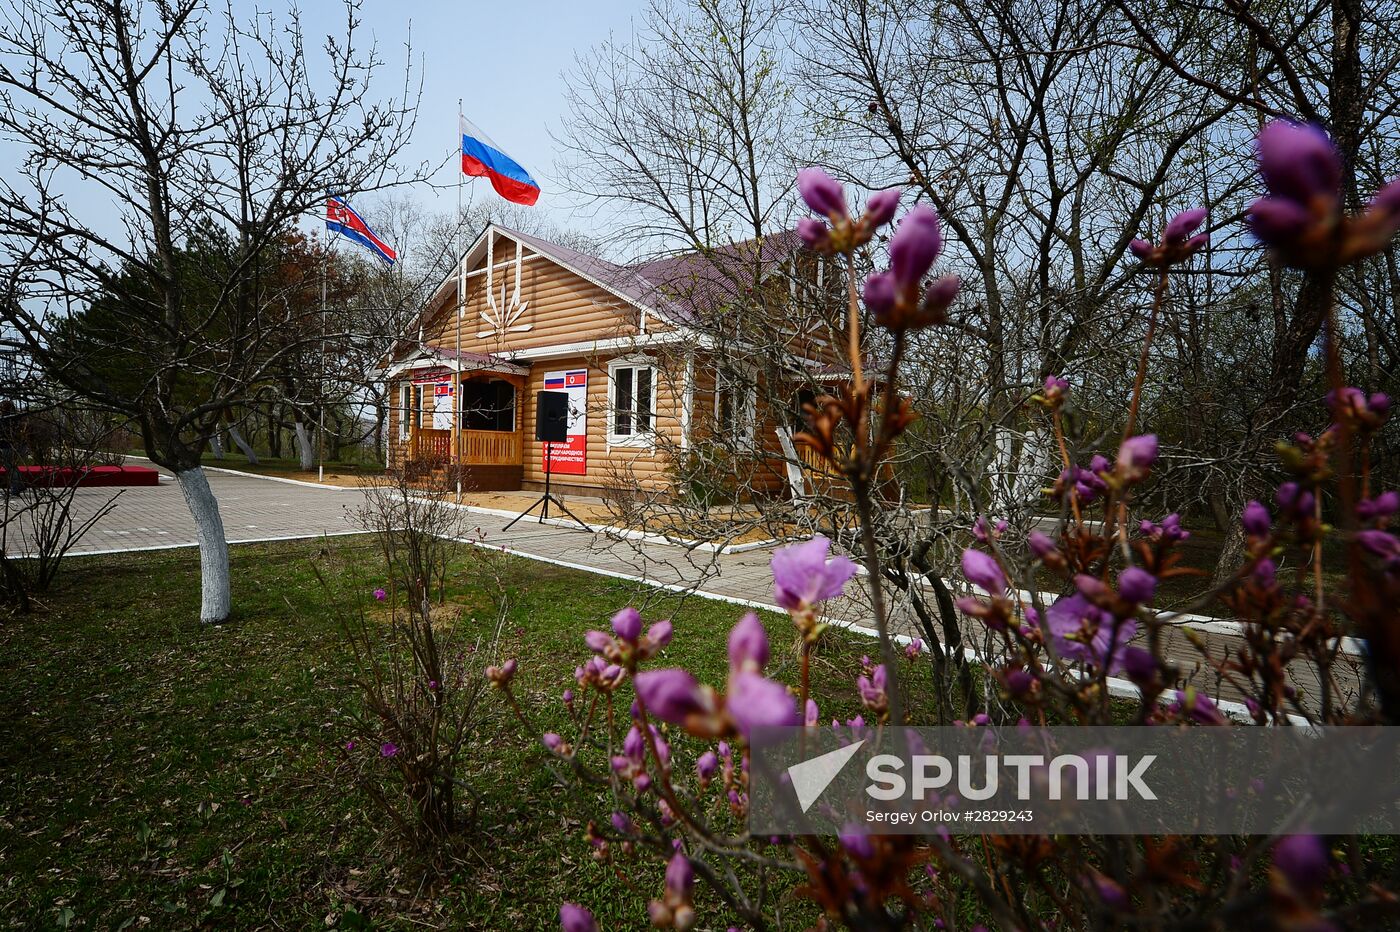 Opening of Russia-DPRK Friendship House